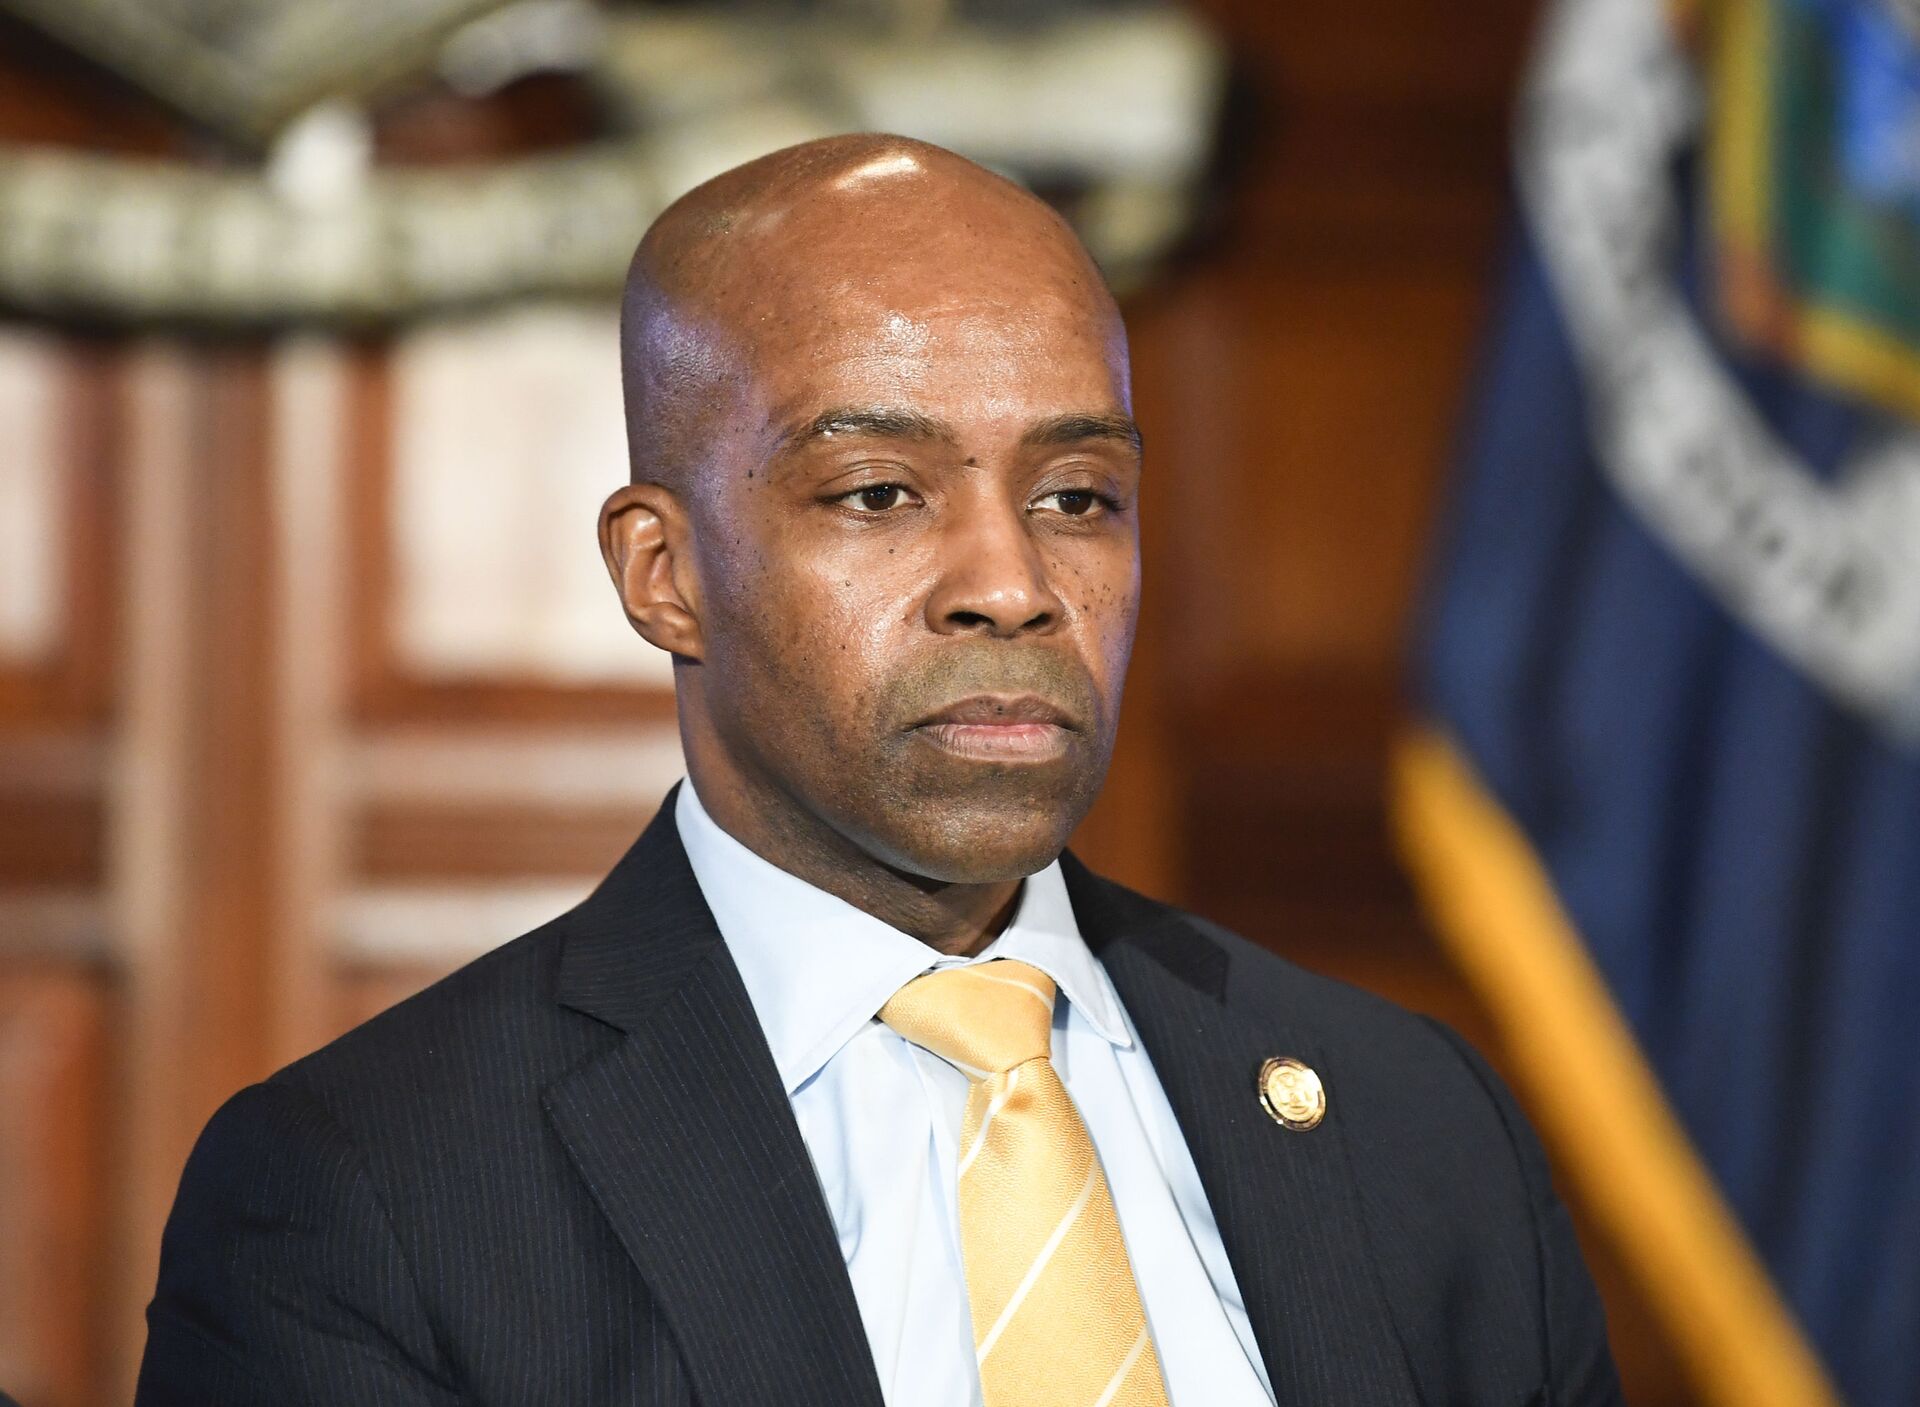 Alphonso David, counsel to New York Gov. Andrew Cuomo, during a news conference in the Red Room at the state Capitol Monday, Feb. 11, 2019, in Albany, N.Y. - Sputnik International, 1920, 07.09.2021